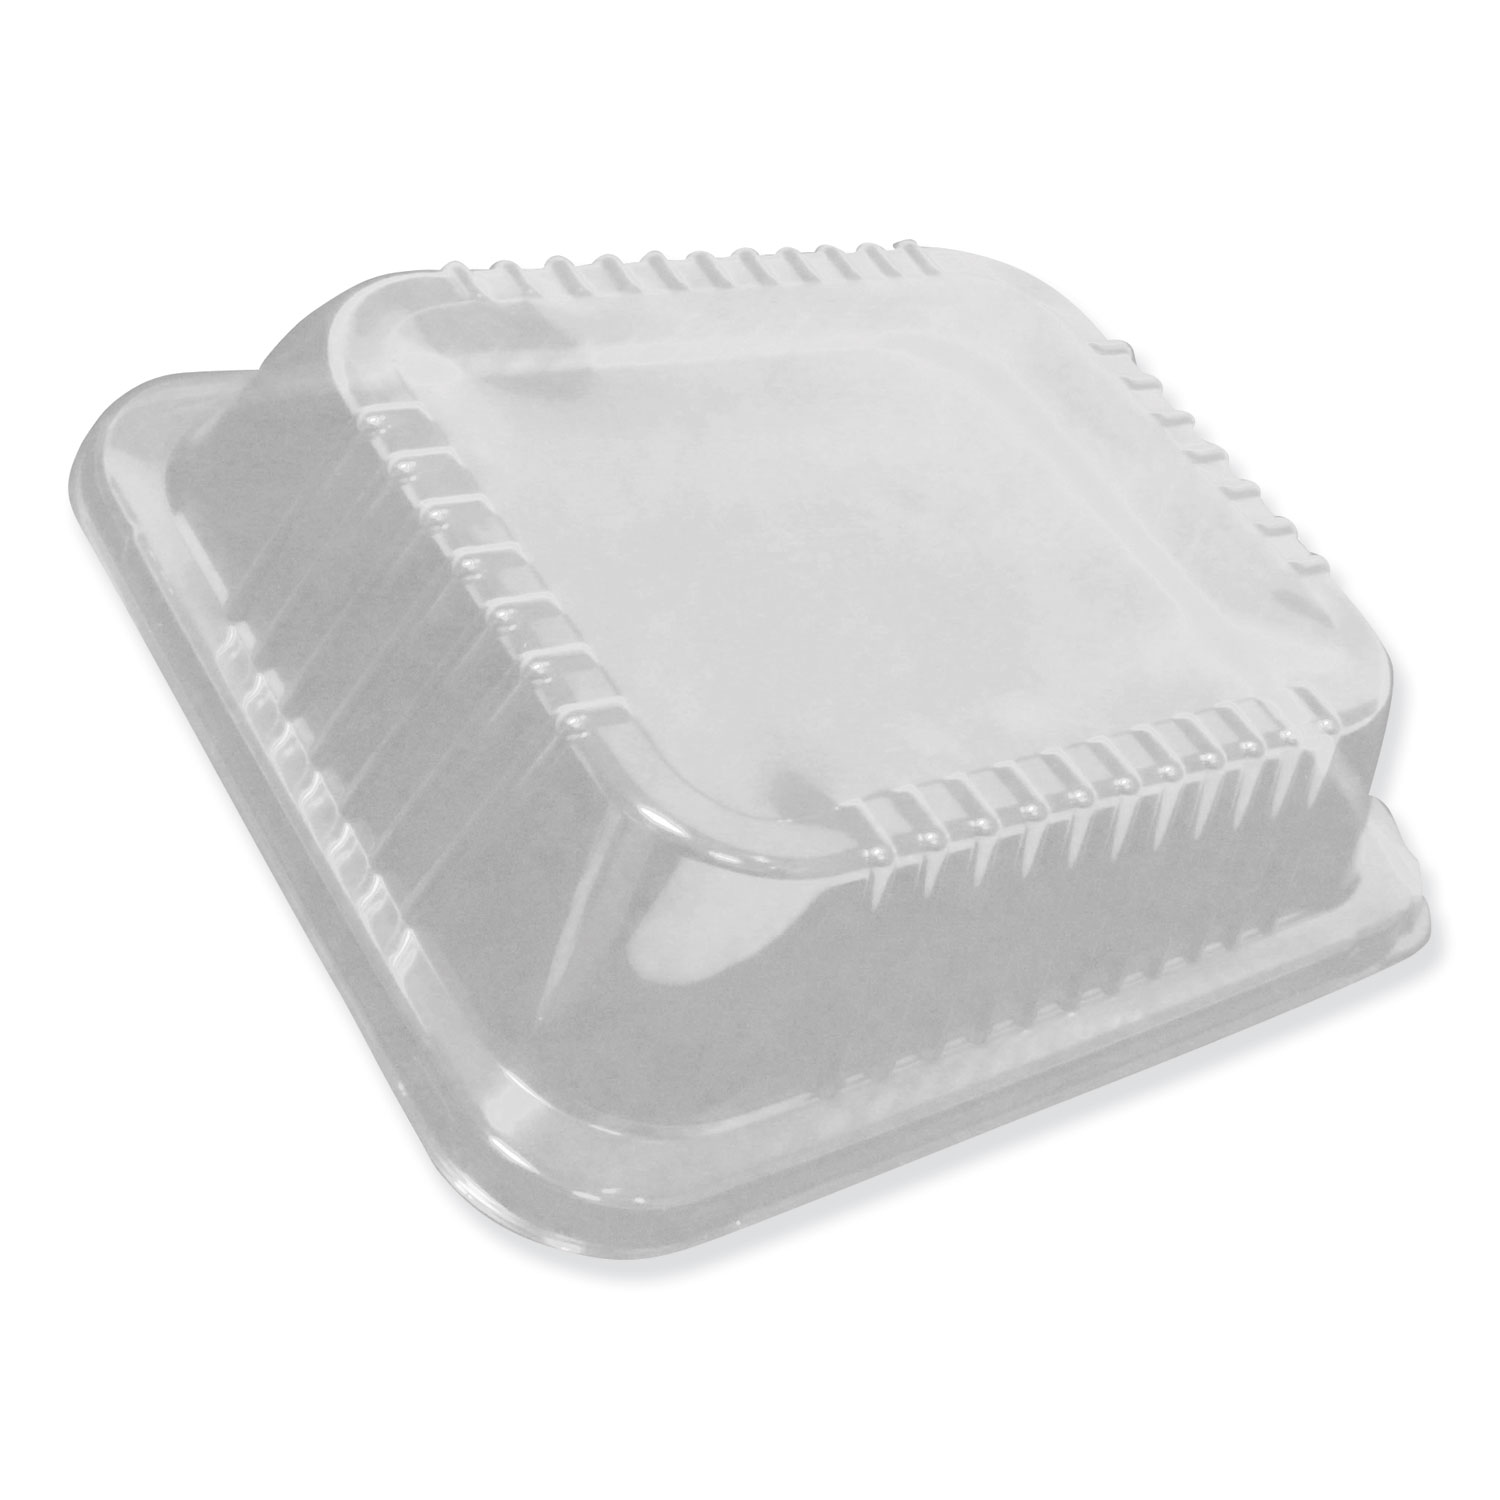  Durable Packaging P4300100 Dome Lids for 10 1/2 x 12 5/8 Oblong Containers, Low Dome, 100/Carton (DPKP4300100) 